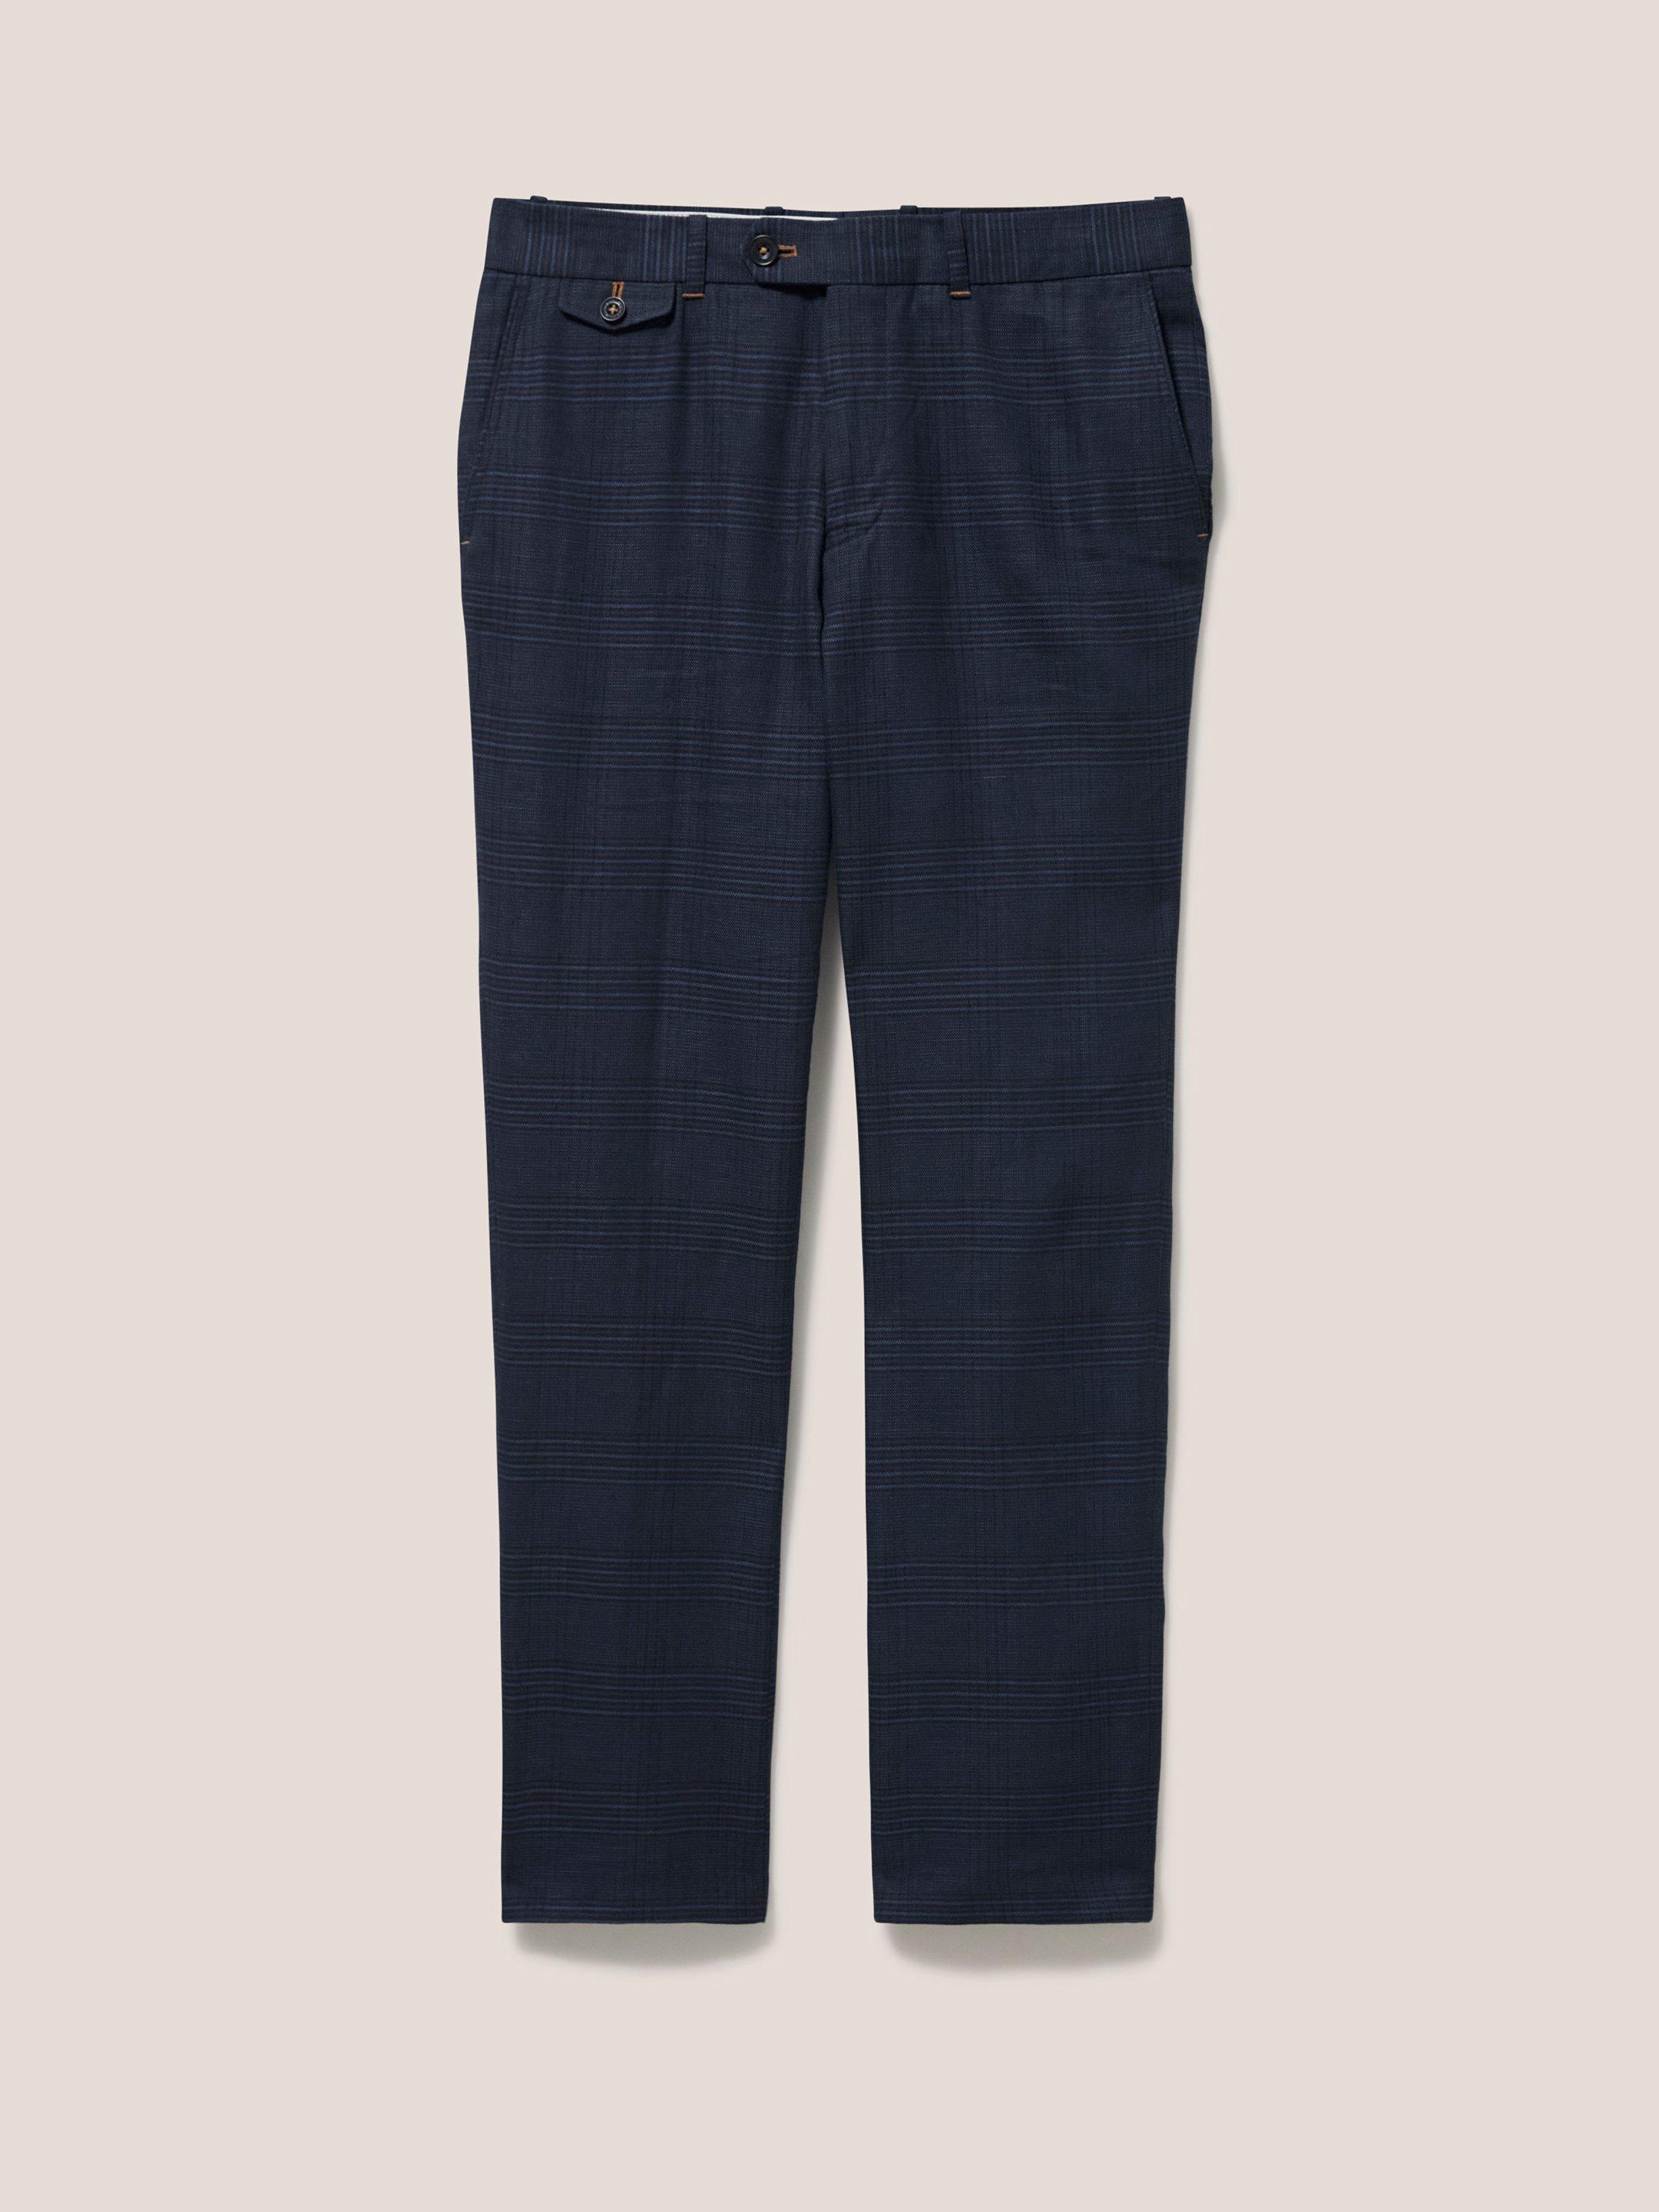 Harrison Check Trouser in DEEP BLUE - FLAT FRONT